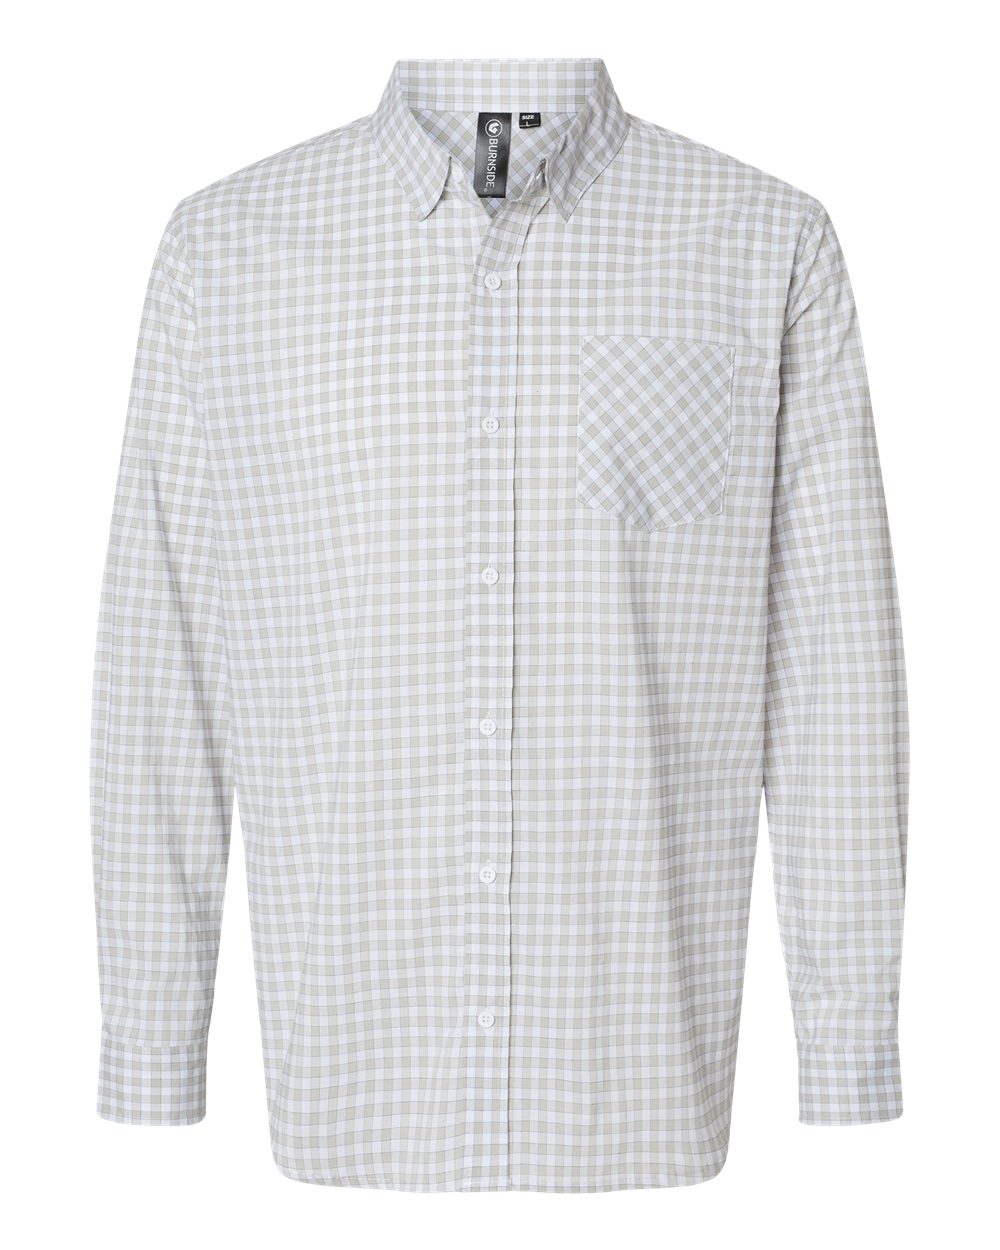 click to view Grey/ White Gingham